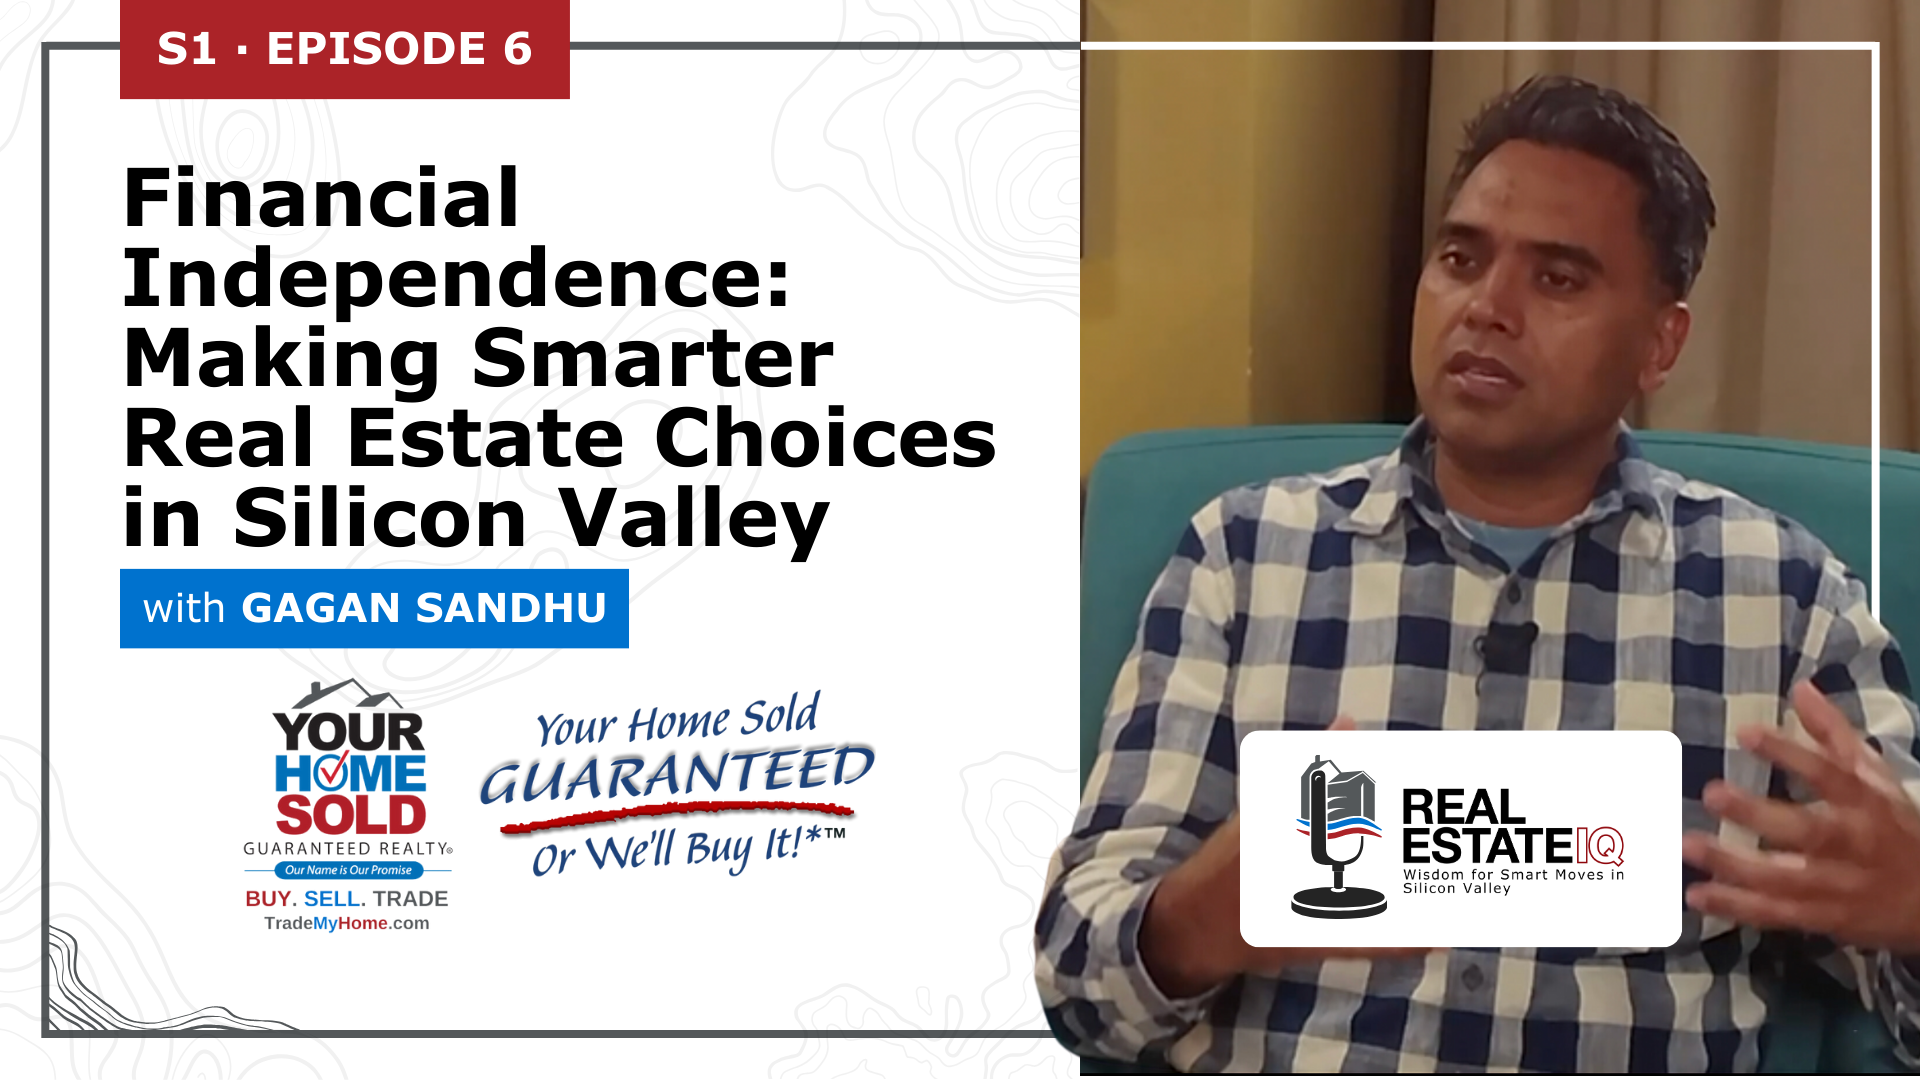 Financial Independence: Making Smarter Real Estate Choices in Silicon Valley Video